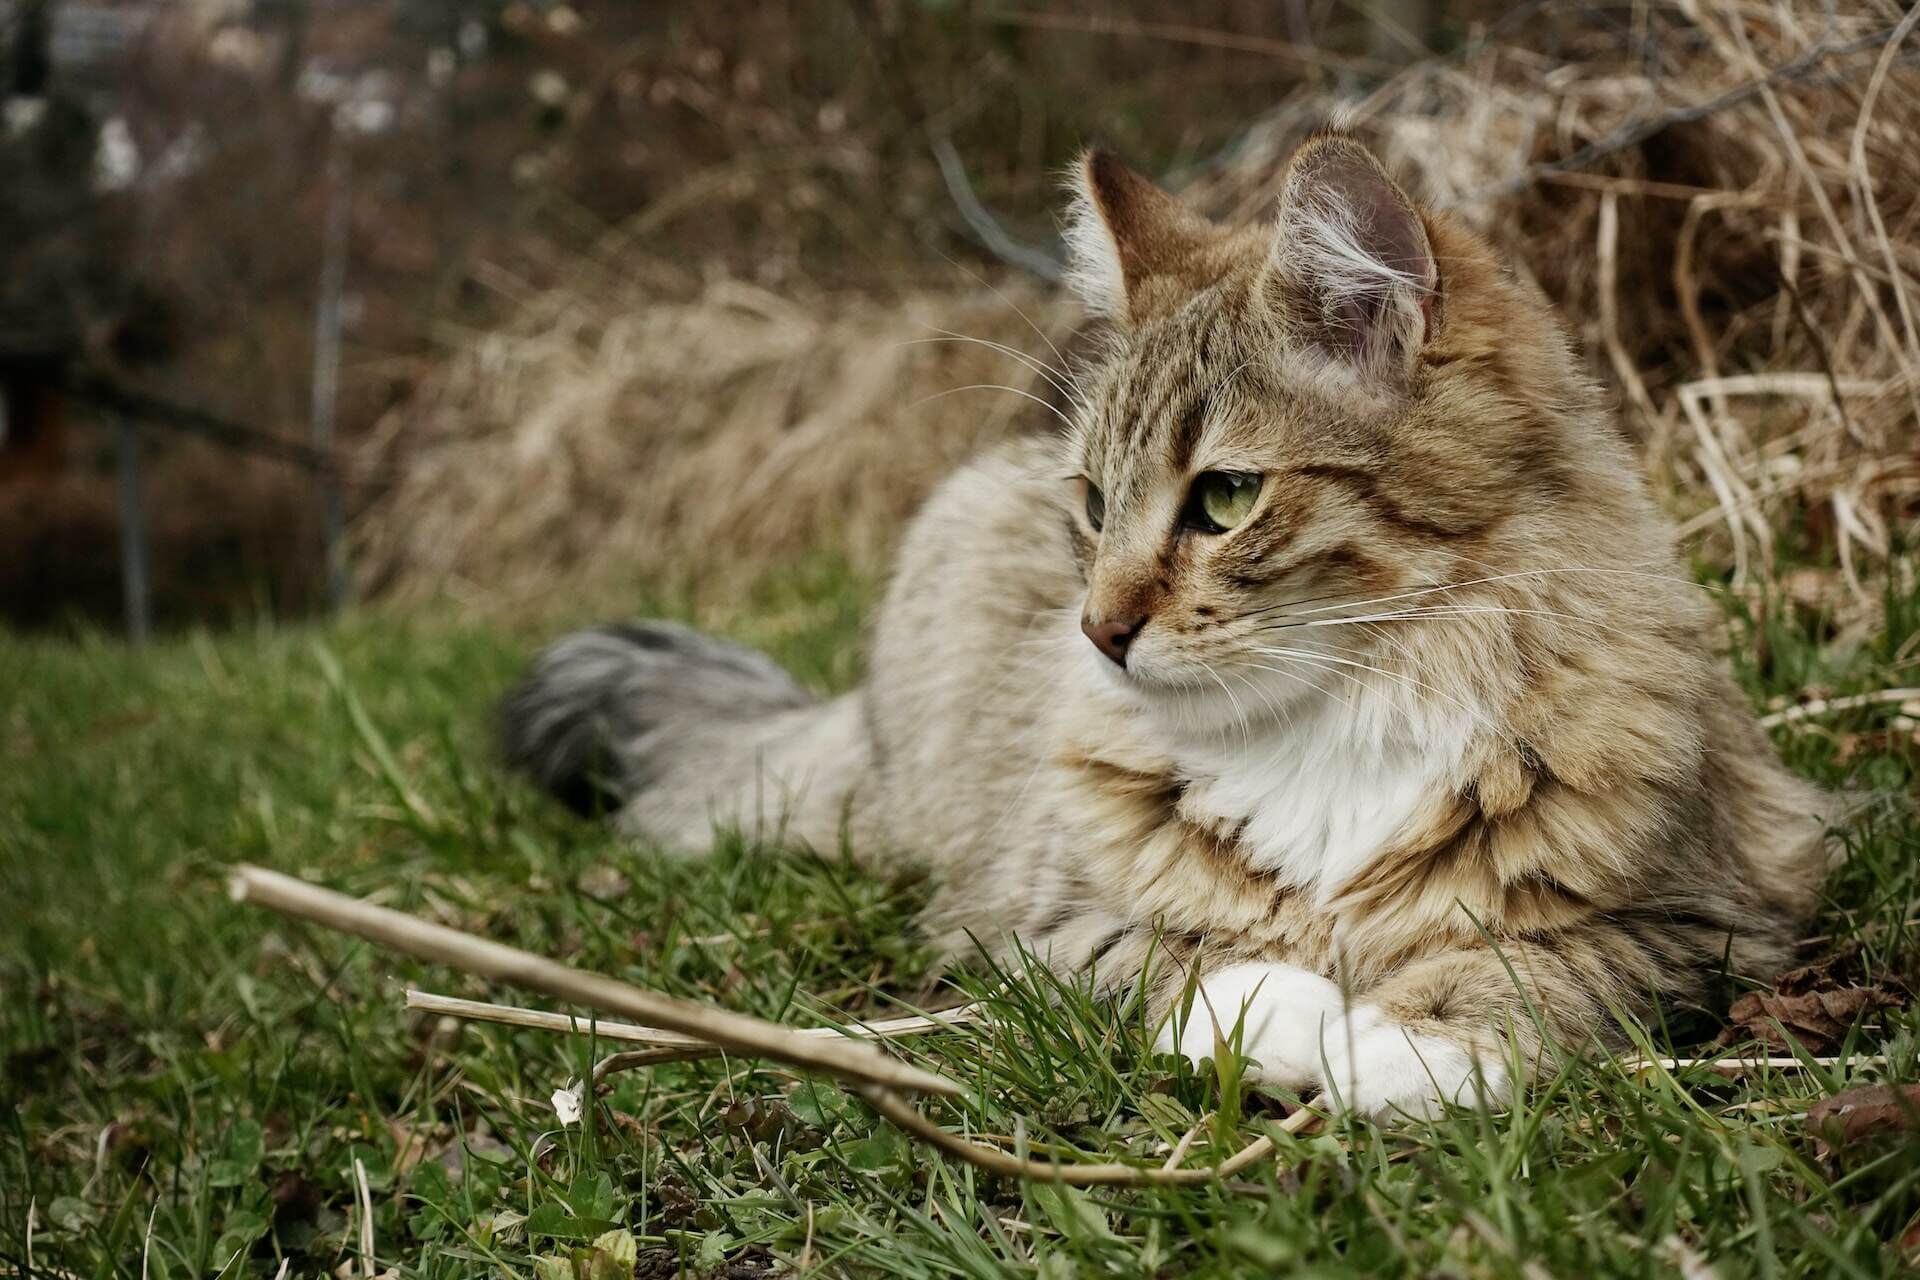 A cat sitting outdoors in a lawn